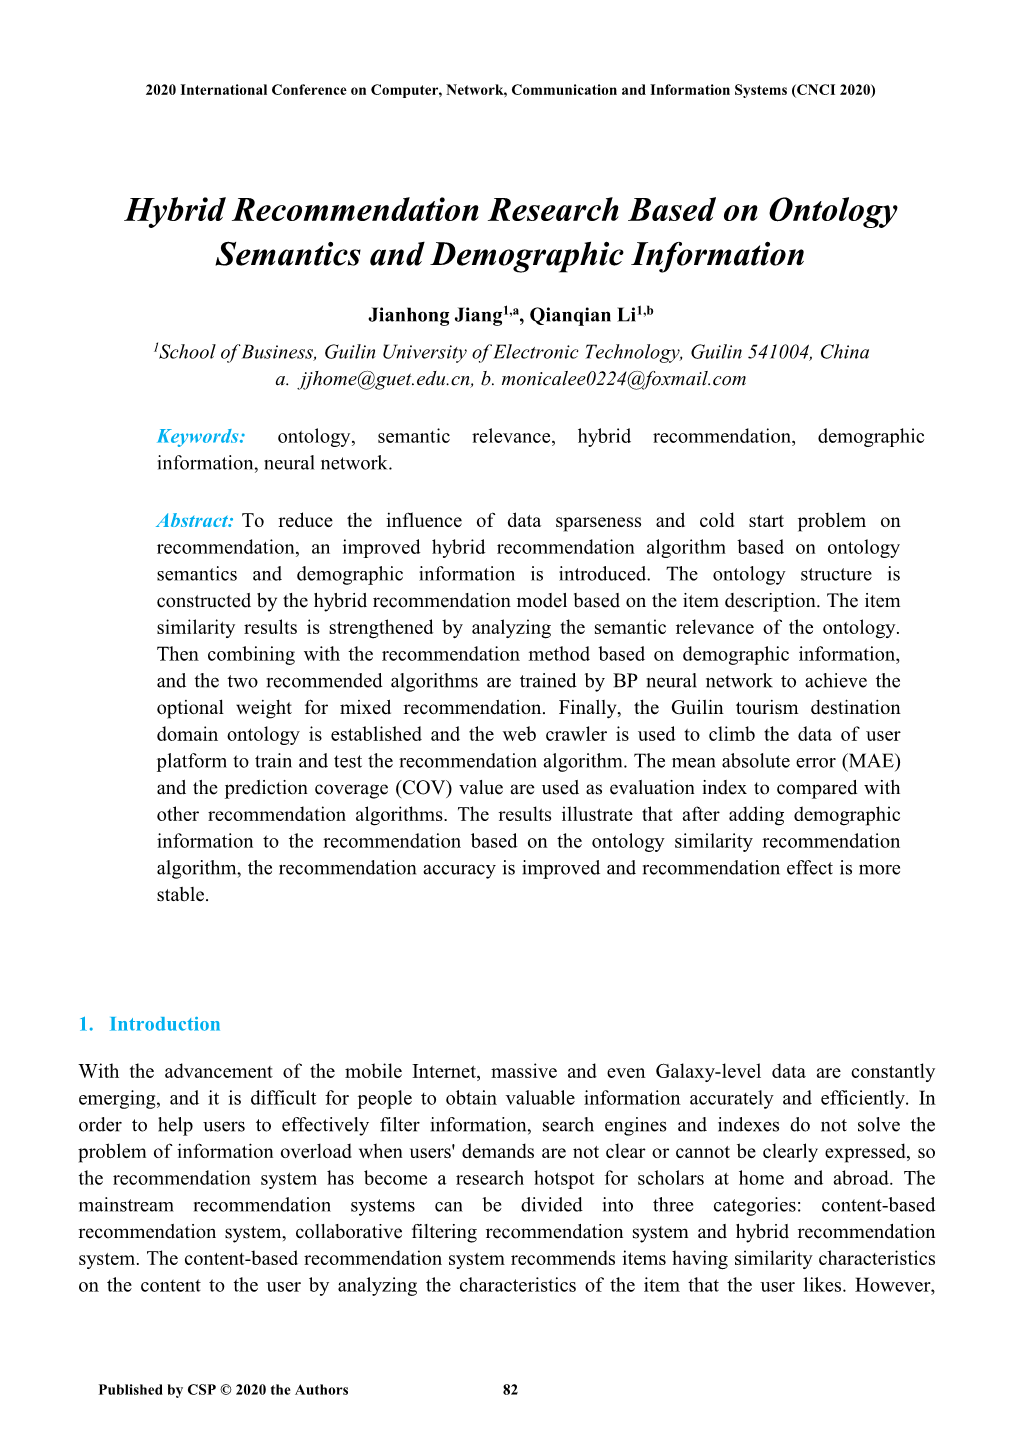 Hybrid Recommendation Research Based on Ontology Semantics and Demographic Information